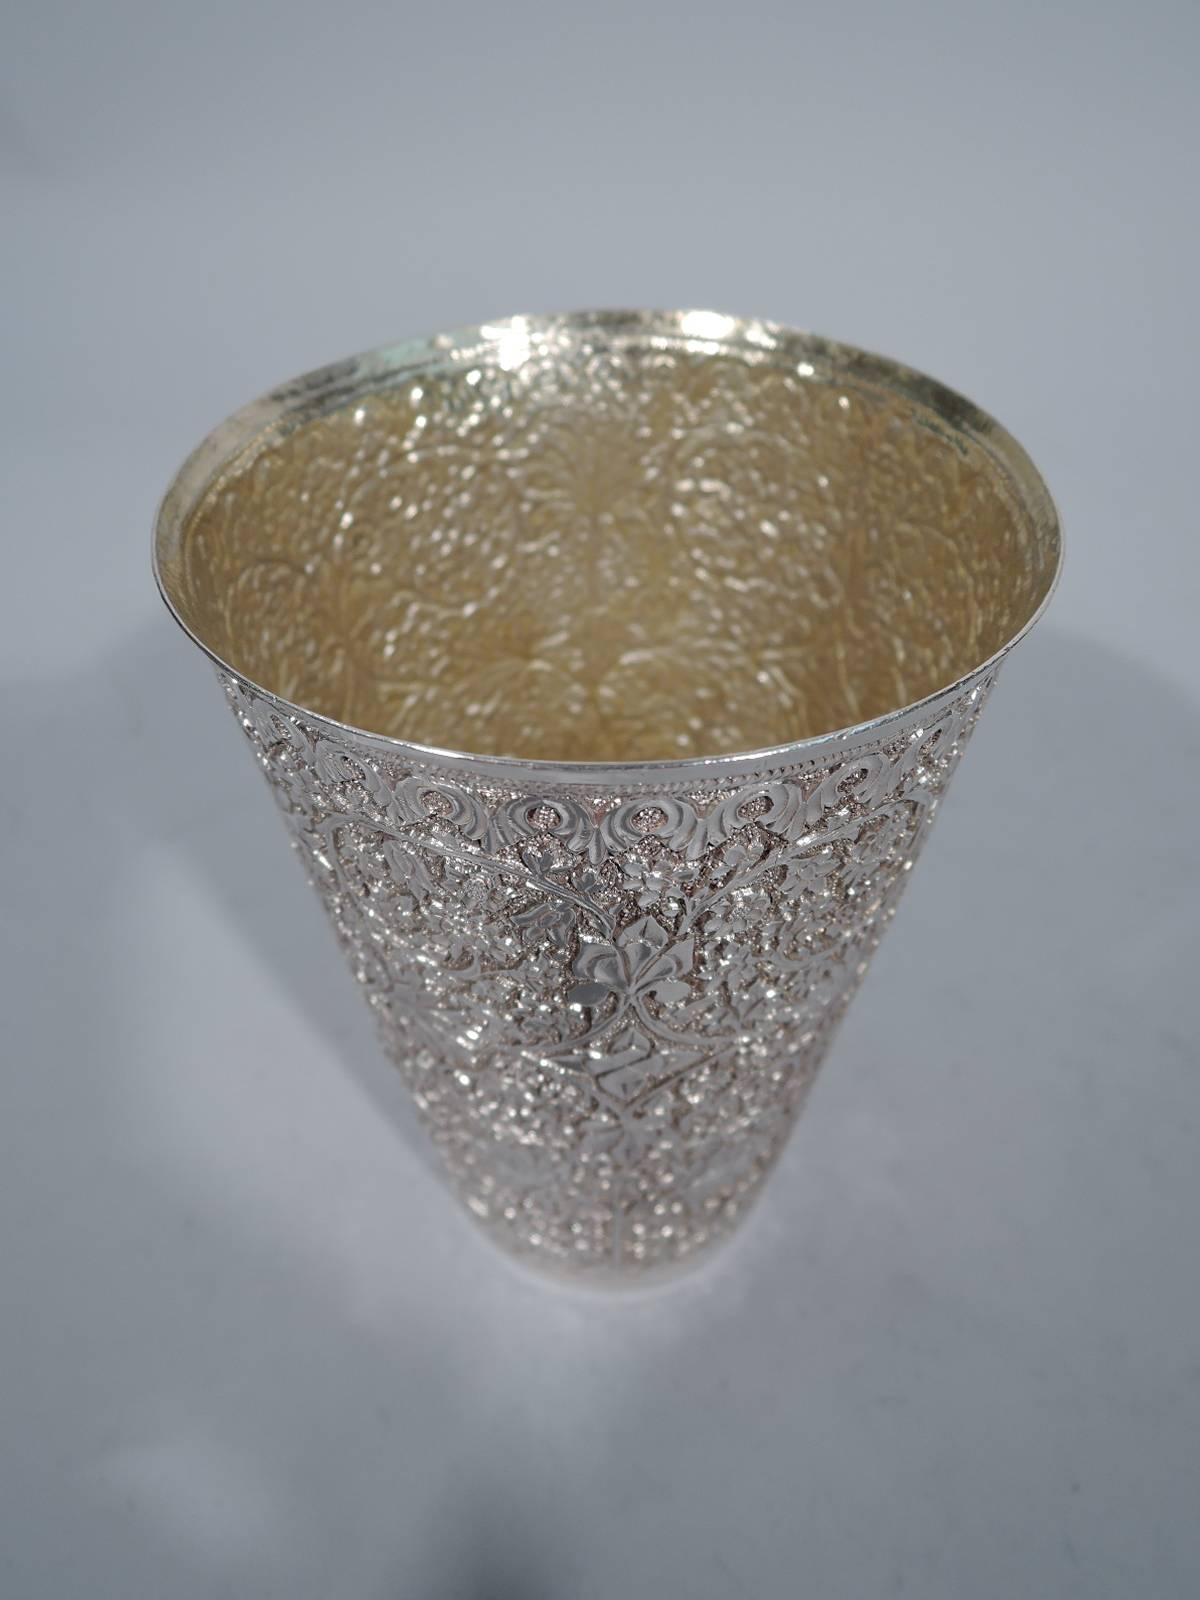 Antique Indian silver tumbler. Straight and tapering sides with dense repousse flowers and tendrils on stippled ground. Perfect for nimbu. Lightly gilt interior.

Dimensions: H 5 1/8 x D 3 ½ in. Weight: 7.2 troy ounces.